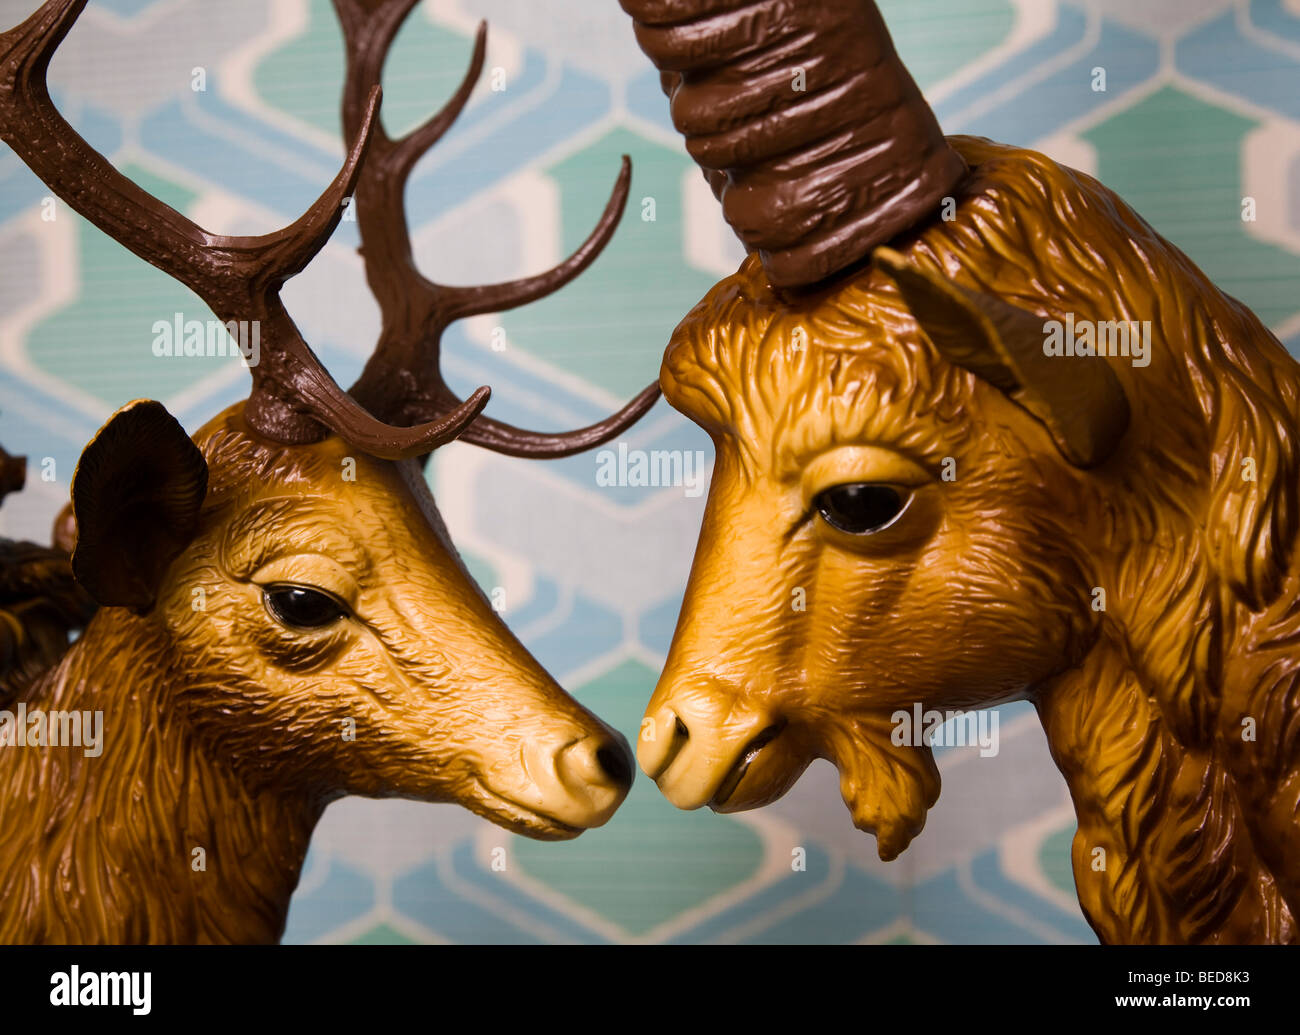 Head of a deer and the head of an ibex, plastic, gazing longingly into each others eyes Stock Photo